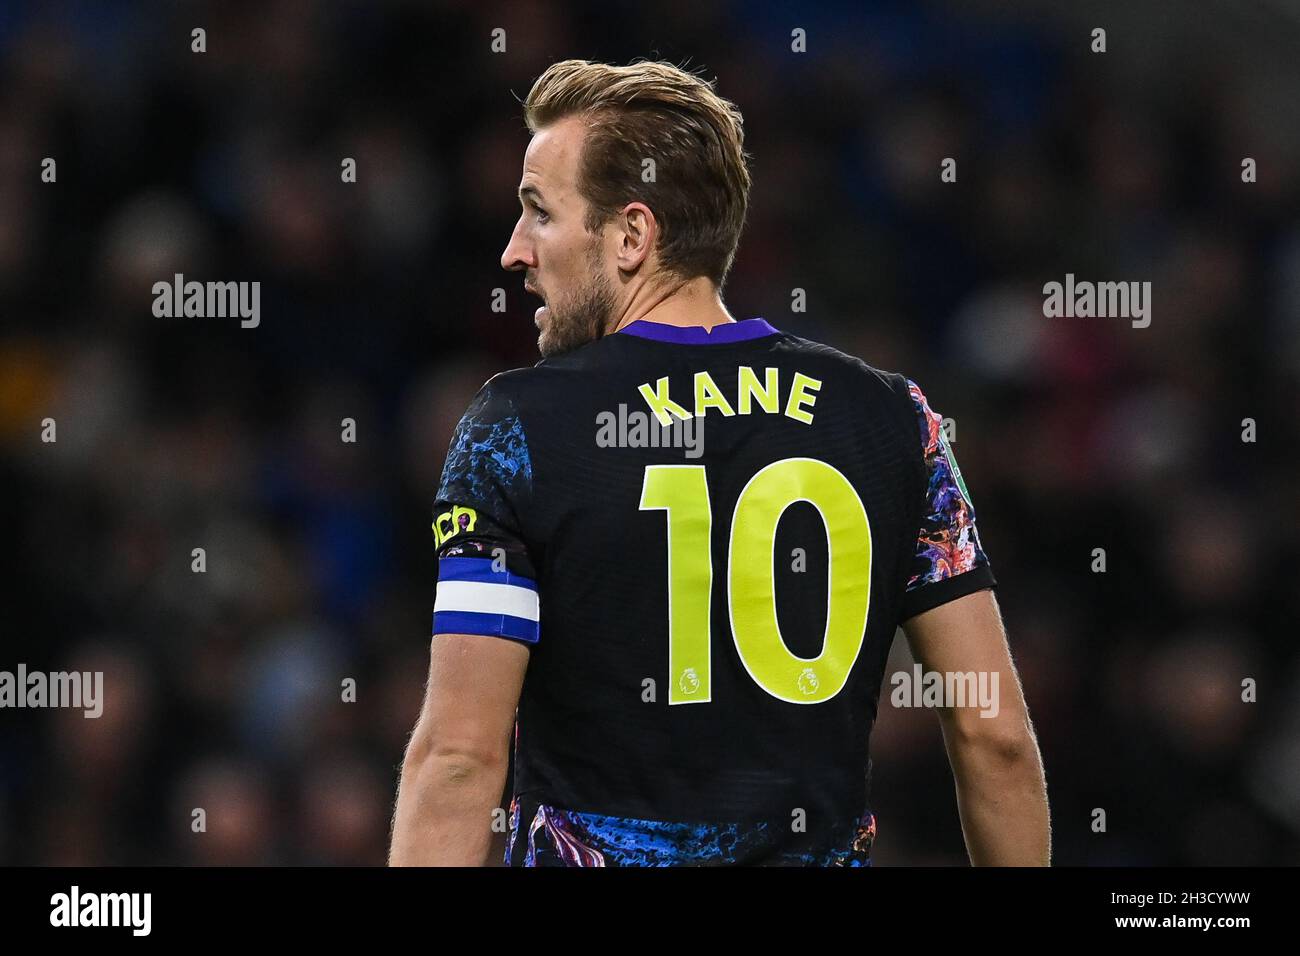 Harry Kane #10 of Tottenham Hotspur during the game Stock Photo